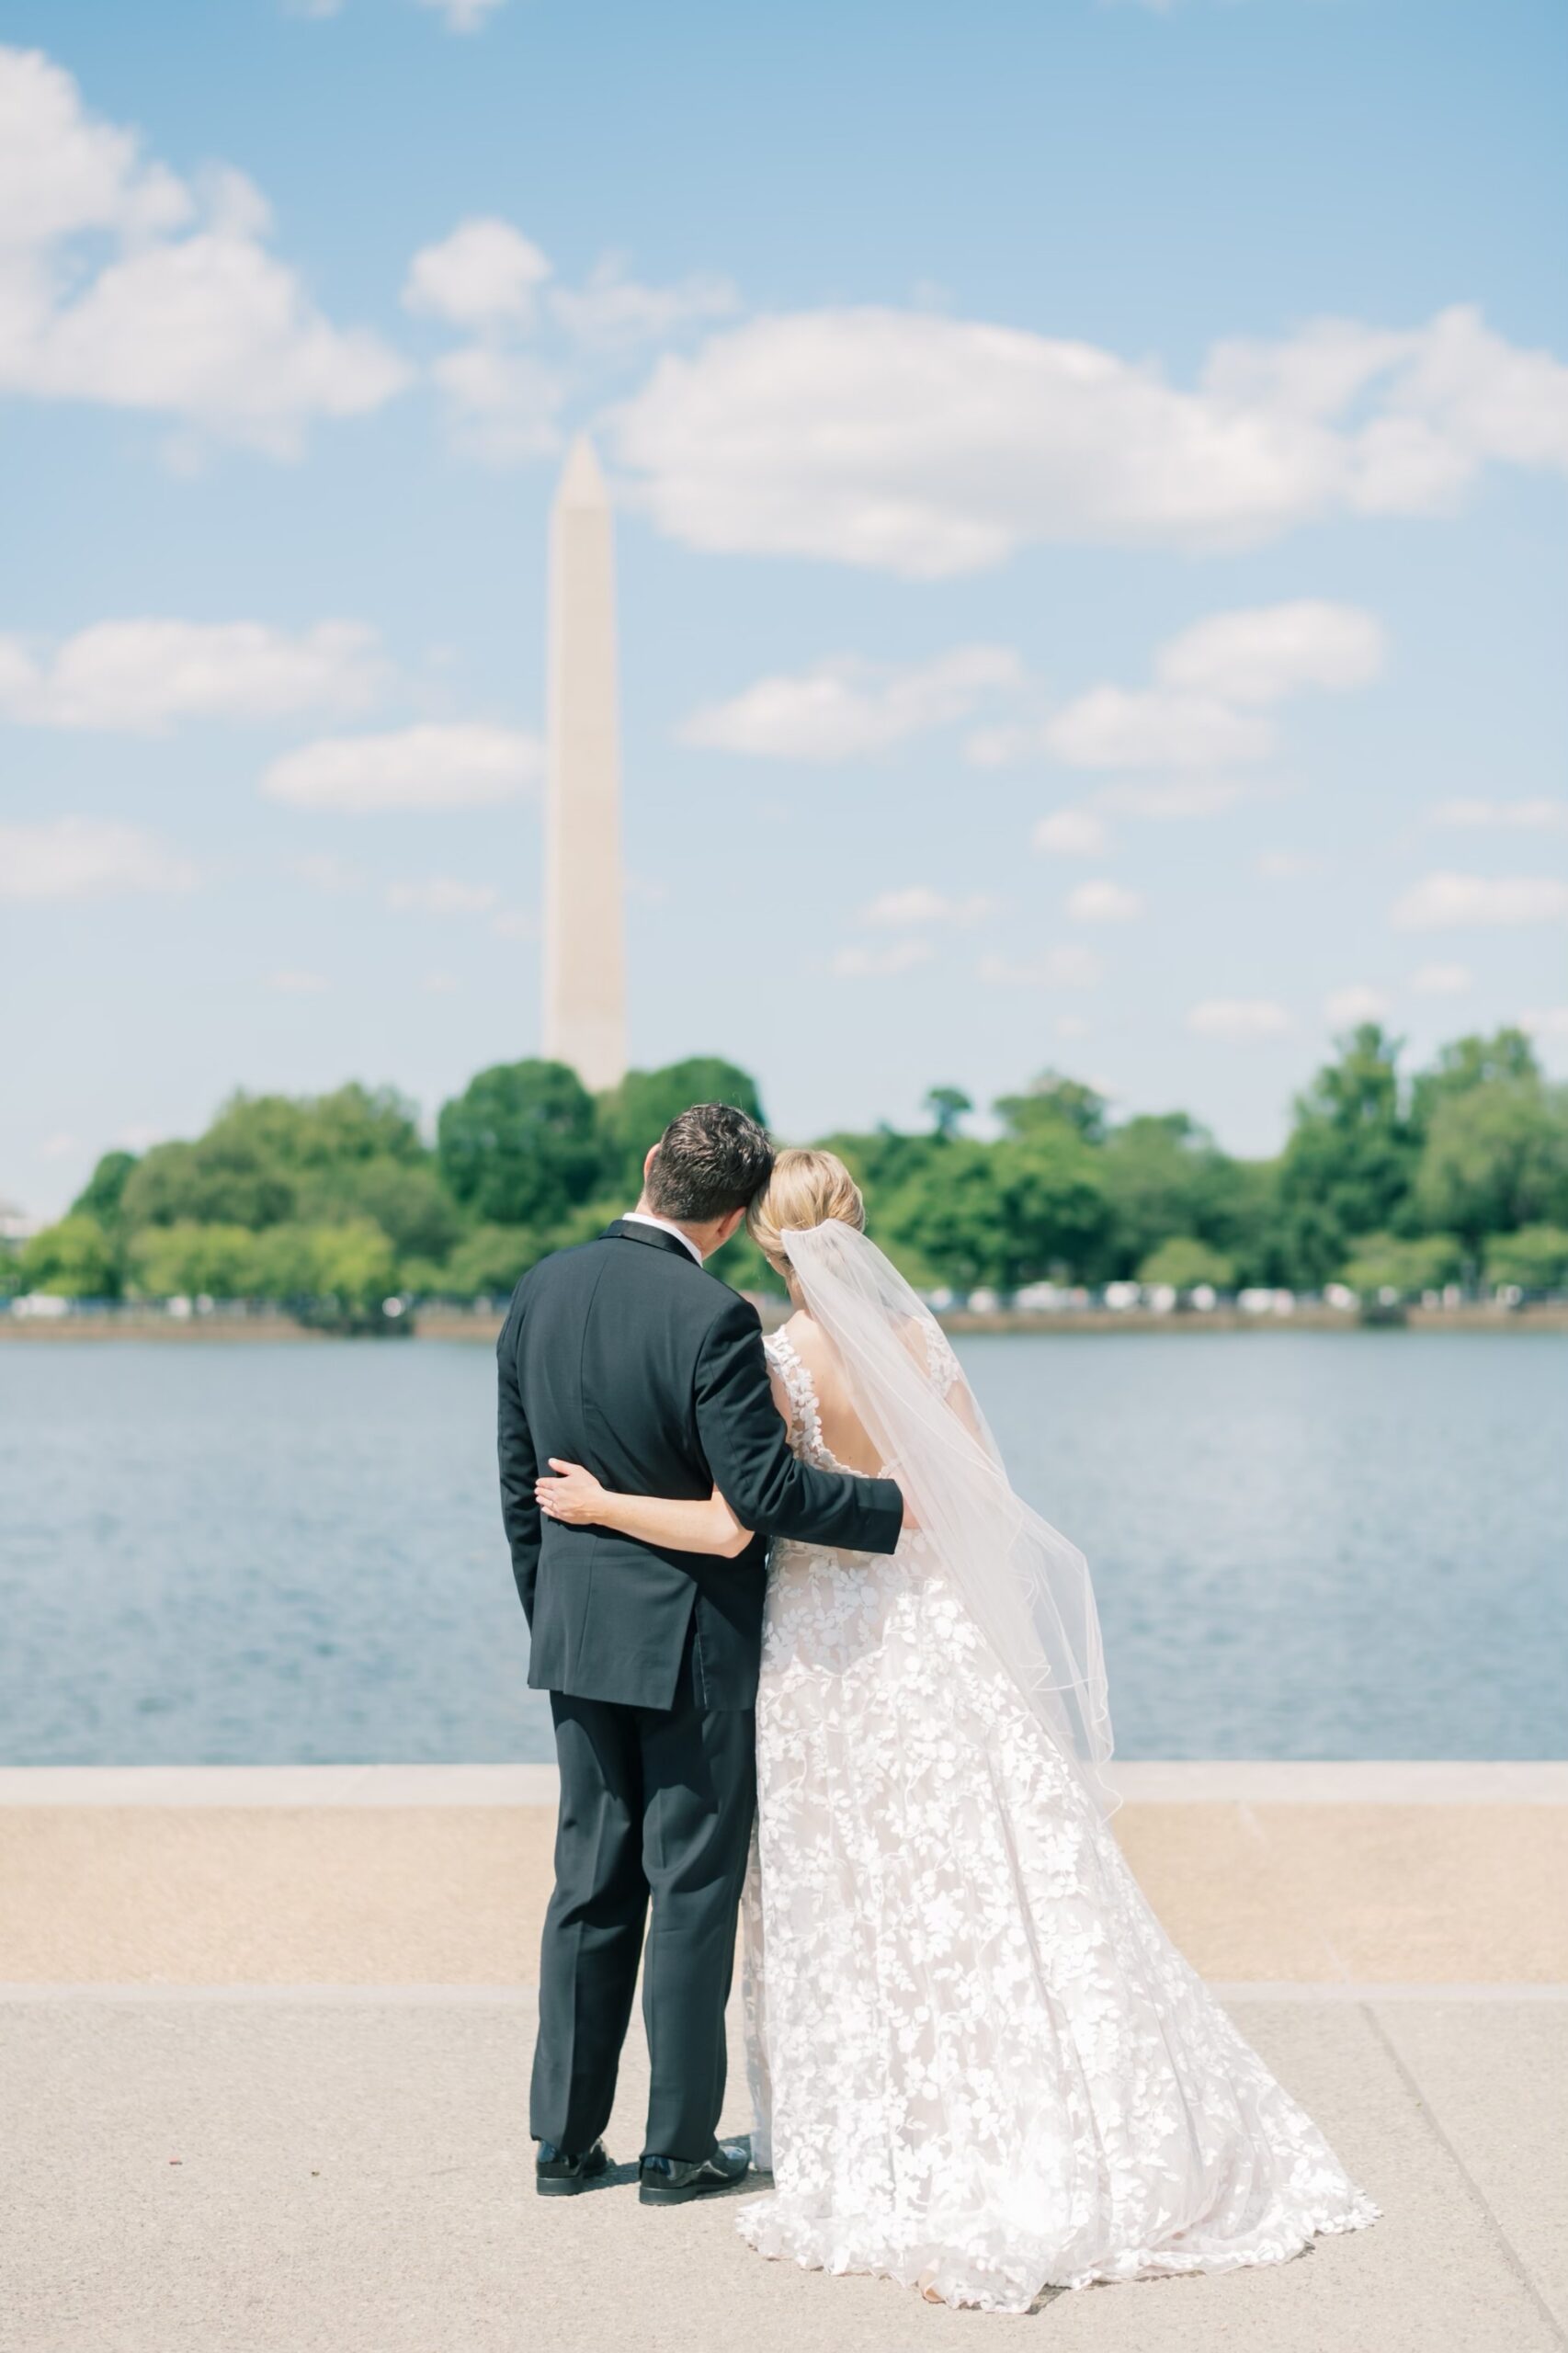 Portrait of a bride and groom at the Tidal Basin in DC looking at the Washington Monument